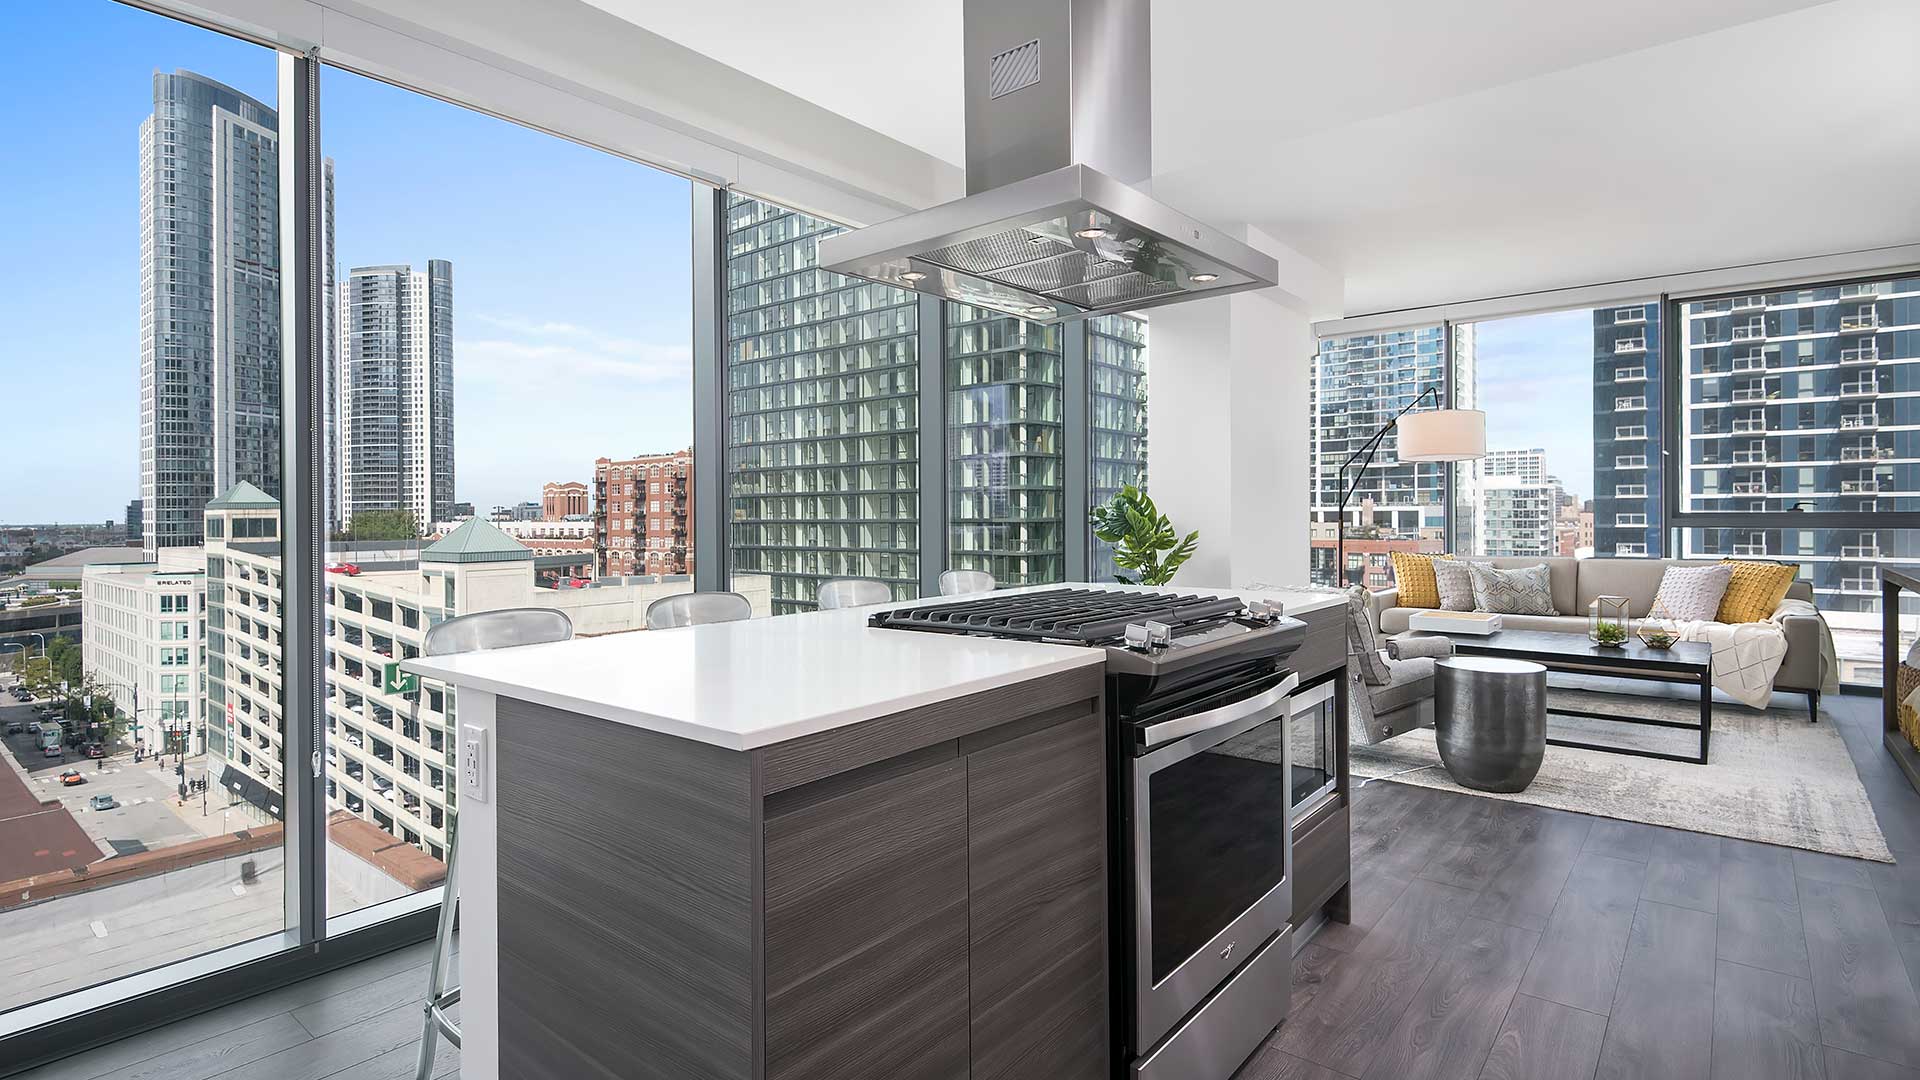 Looking across a kitchen island in a Hubbard221 residence. There is a stainless steel stove with range in the island, a stainless steel exhaust hood above. Beyond the kitchen to the right is a living room set. The walls are all floor-to-ceiling windows with city buildings seen outside.